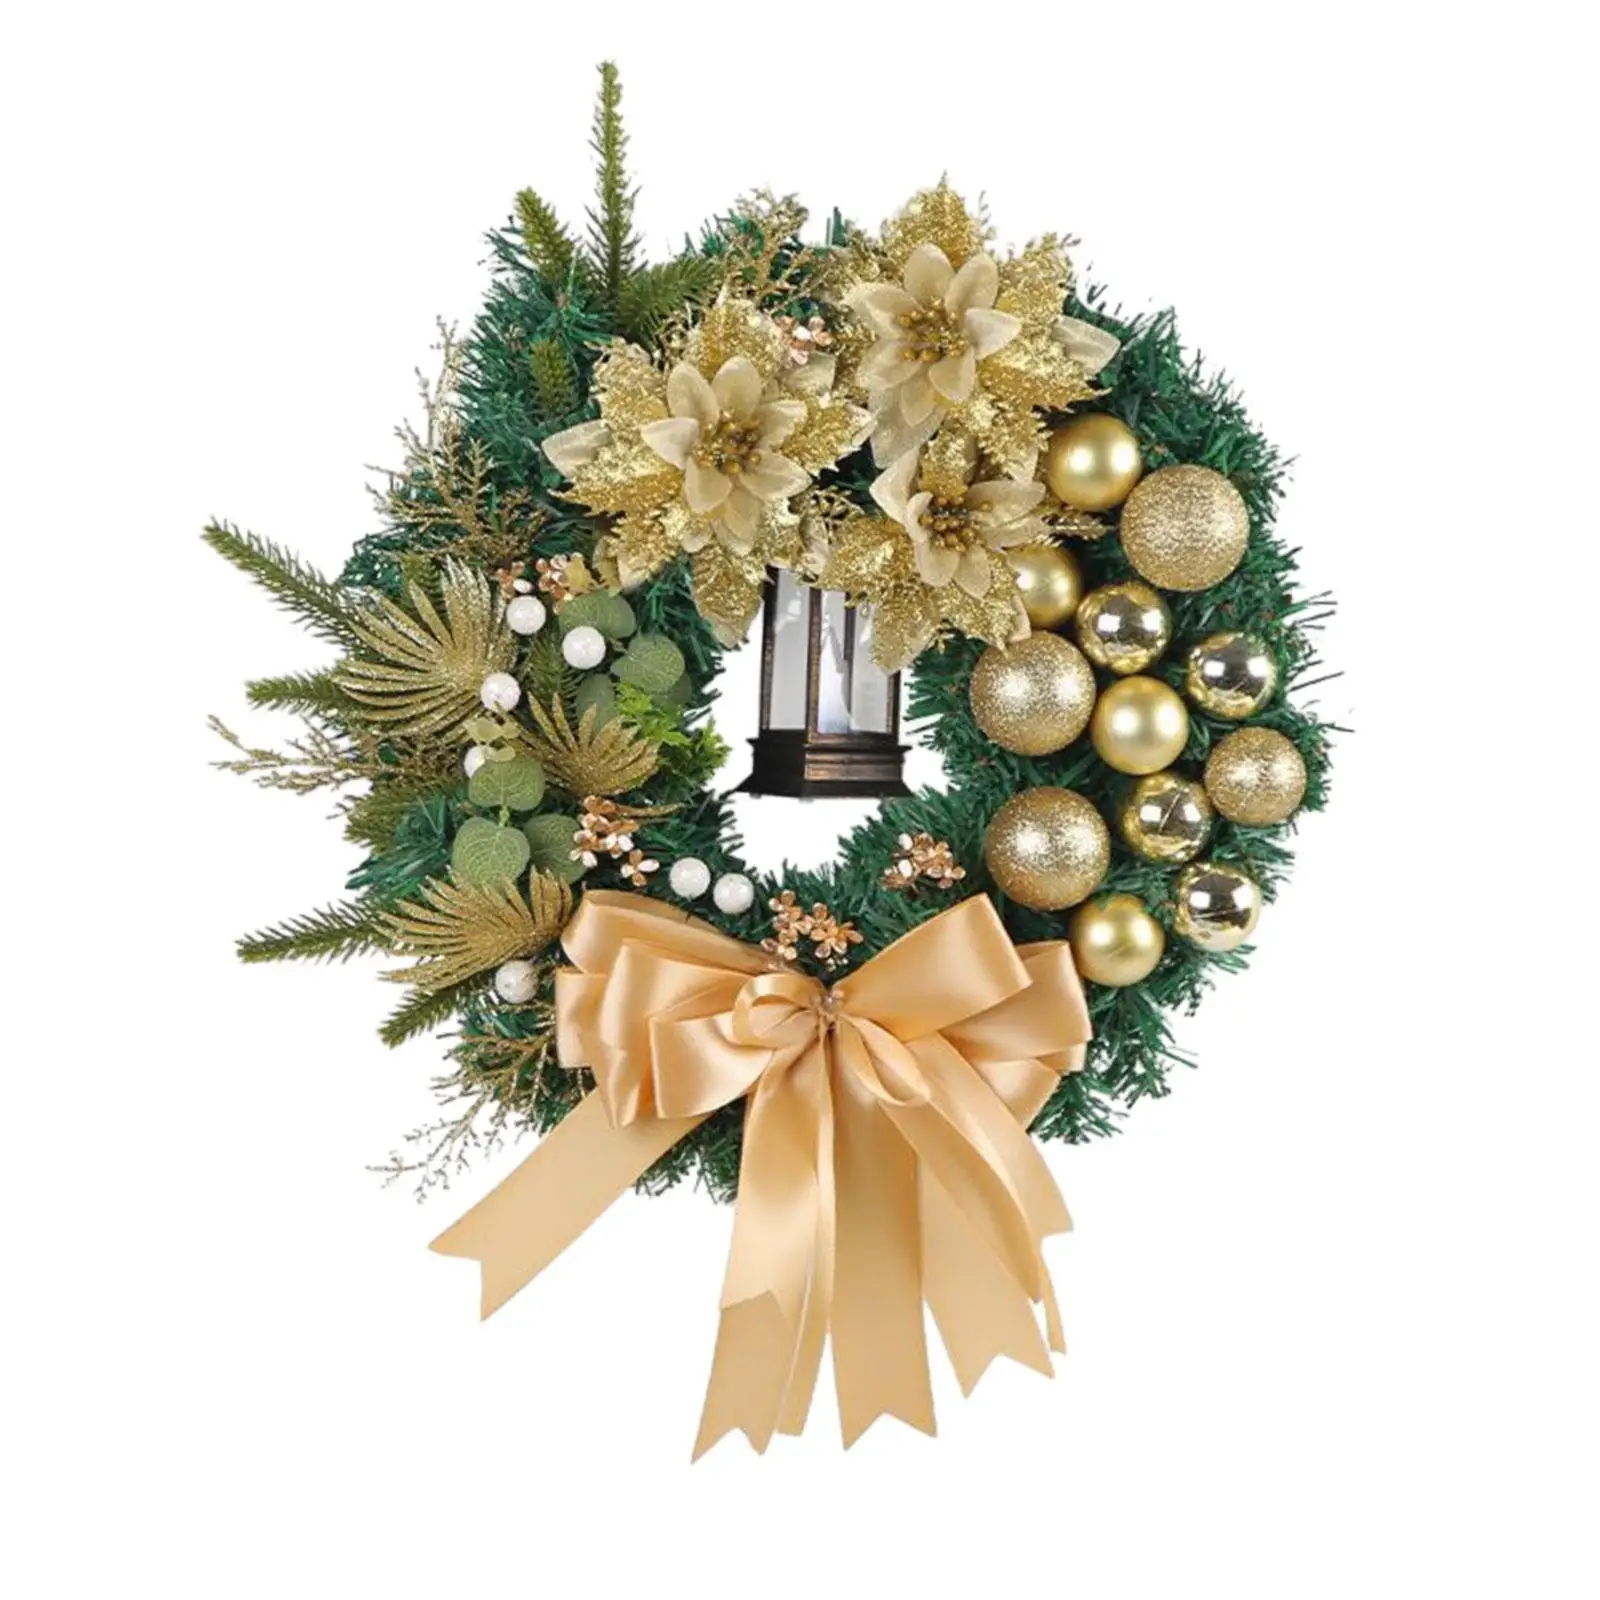 Christmas Wreath with Ball Ornaments Large Ribbon Bowknot 16 inch Xmas Wreath for Thanksgiving Window Outdoor Porch Decor